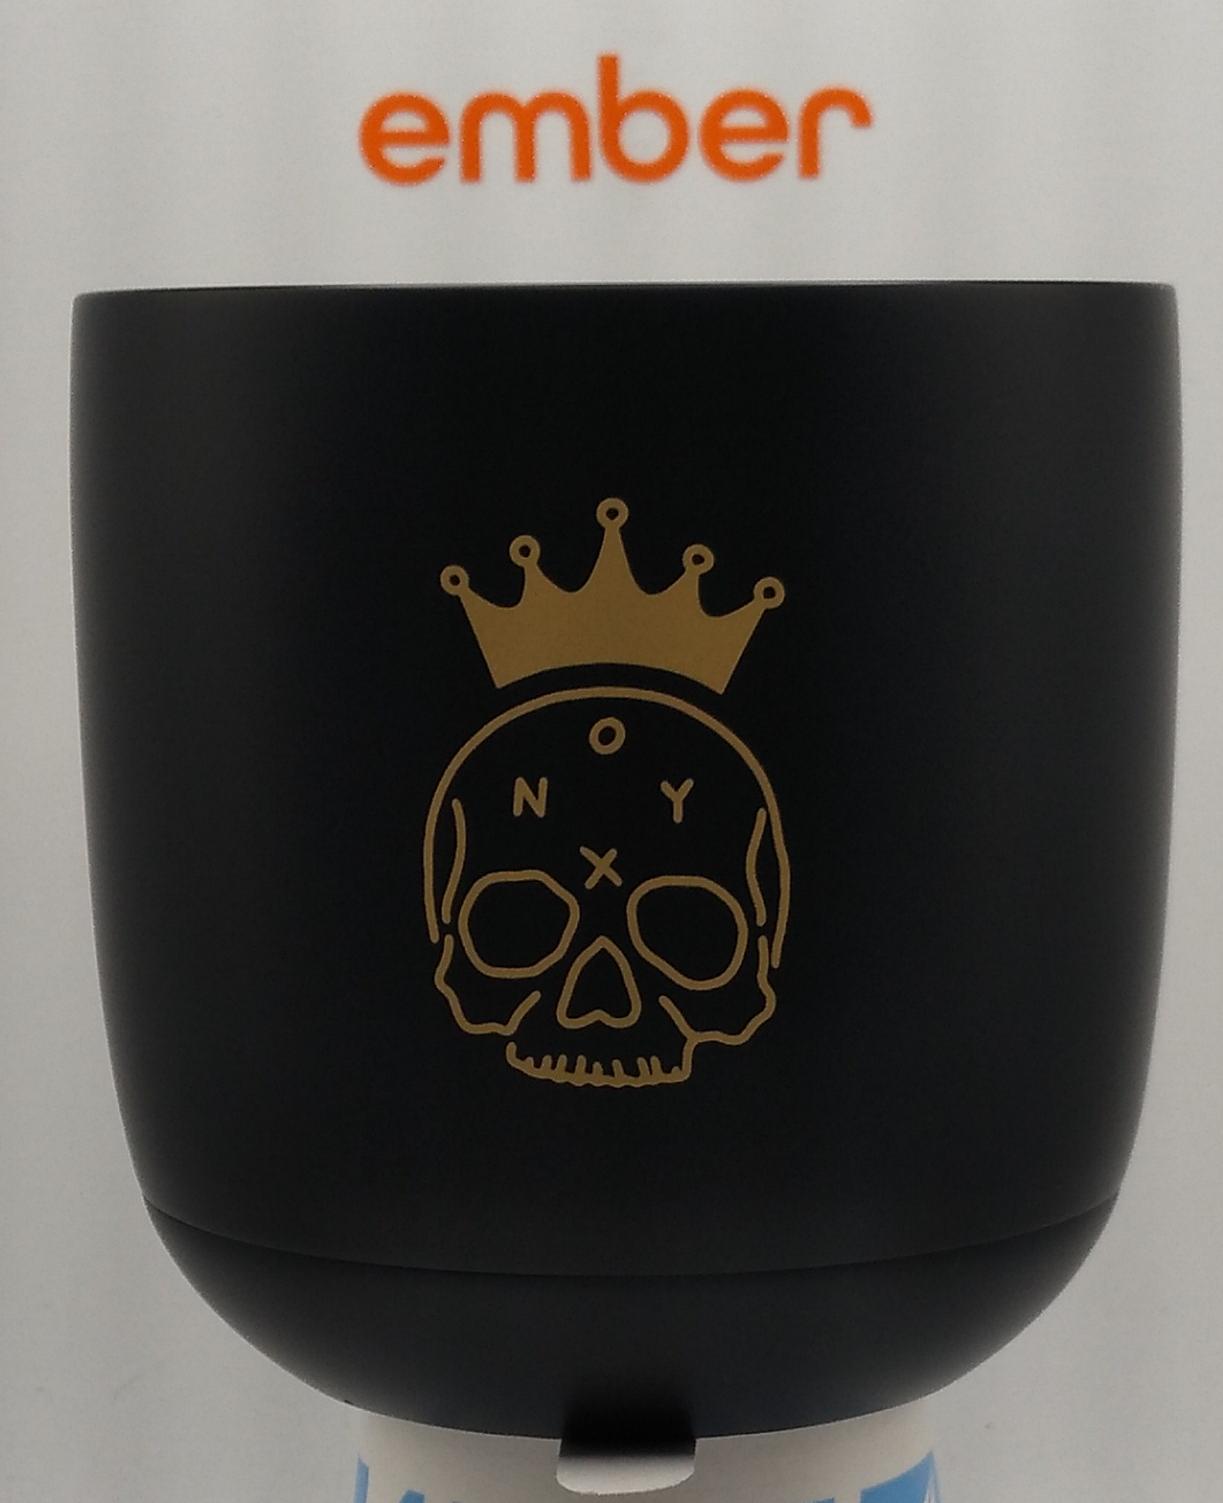 Ember Cup custom printed with your company name or logo 6 oz